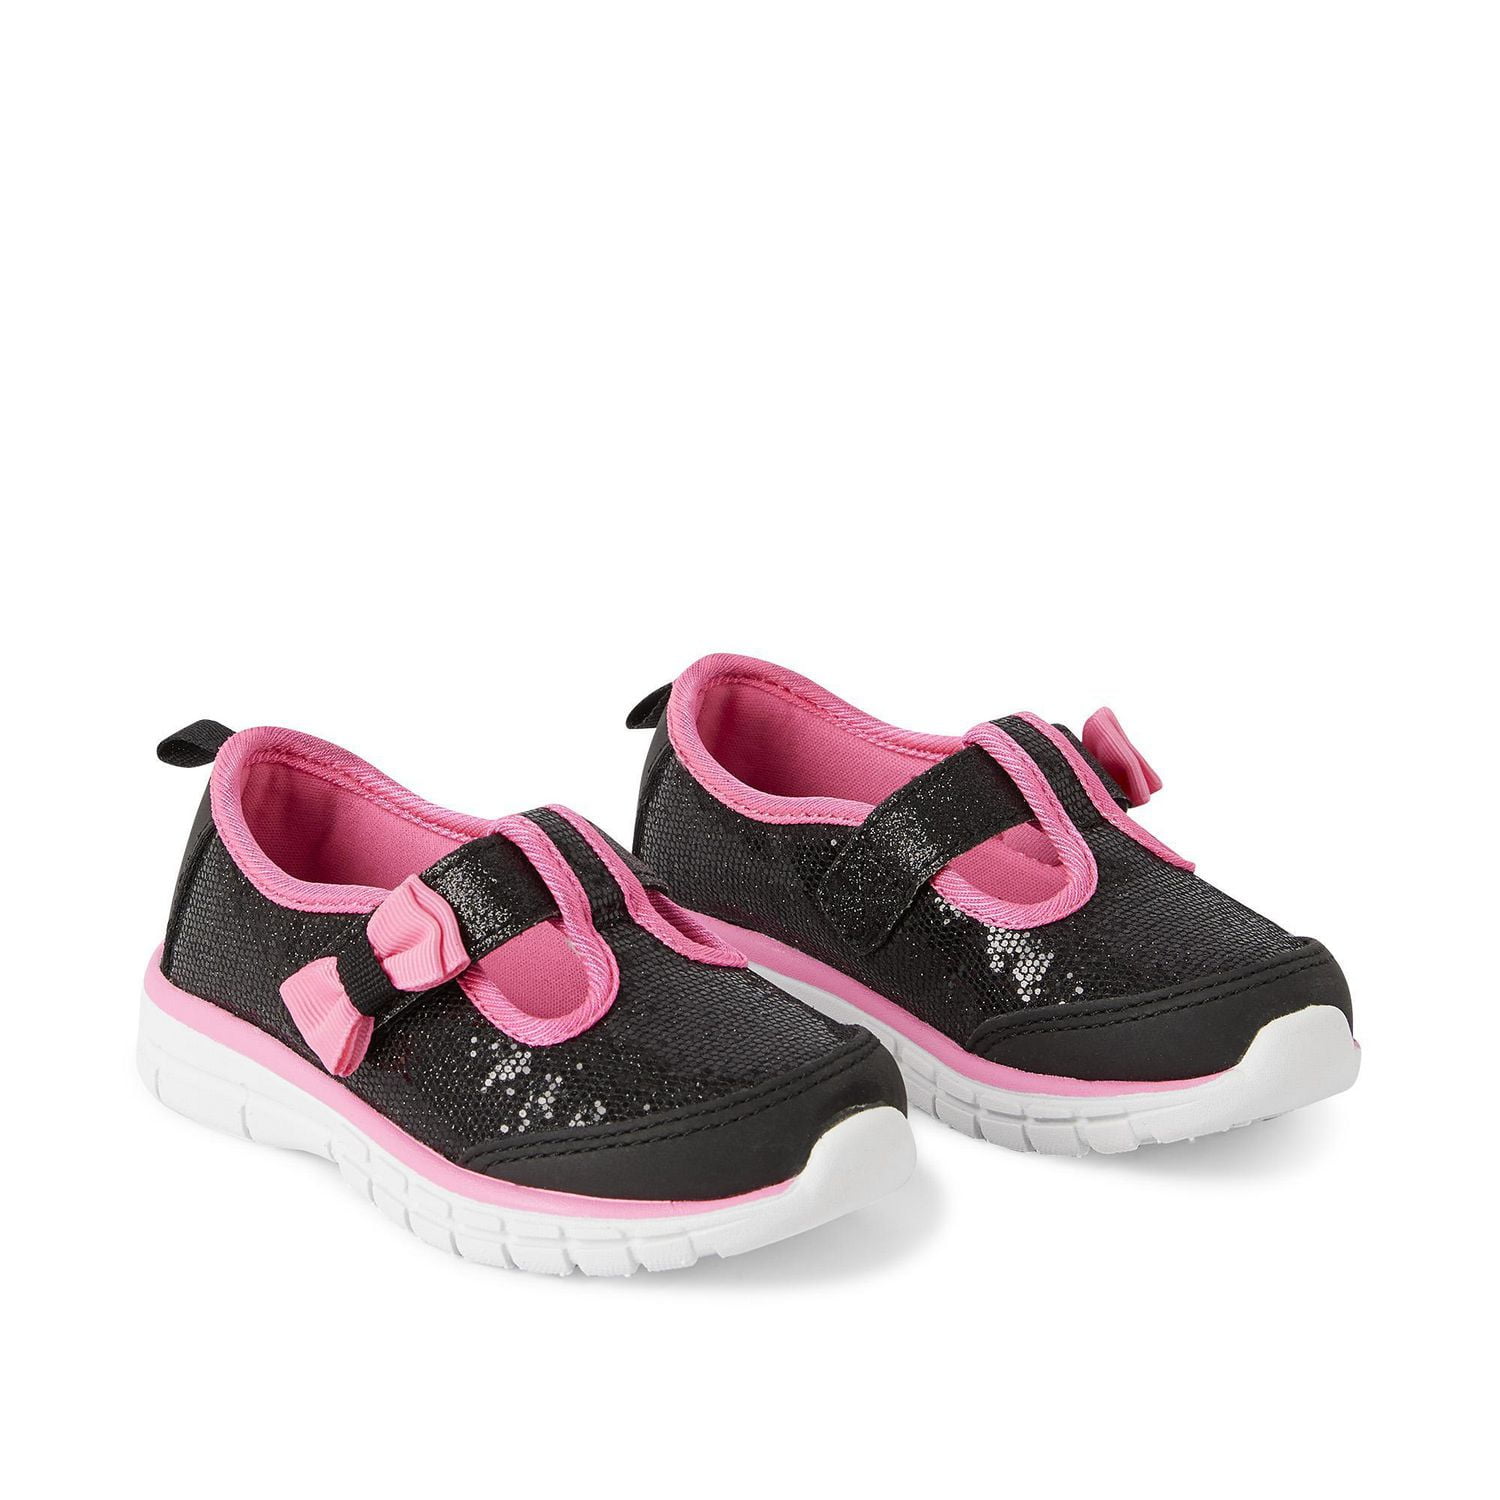 Kids Shoes 90 Designer 90s Baby Tiny Toddlers Black Sneakers Slip On  Athletic Red Trainers Boys Girls Children Luxury Shoe Outdoor Sports Infant  Youth Pink Sneaker From Belgiums, $41.65